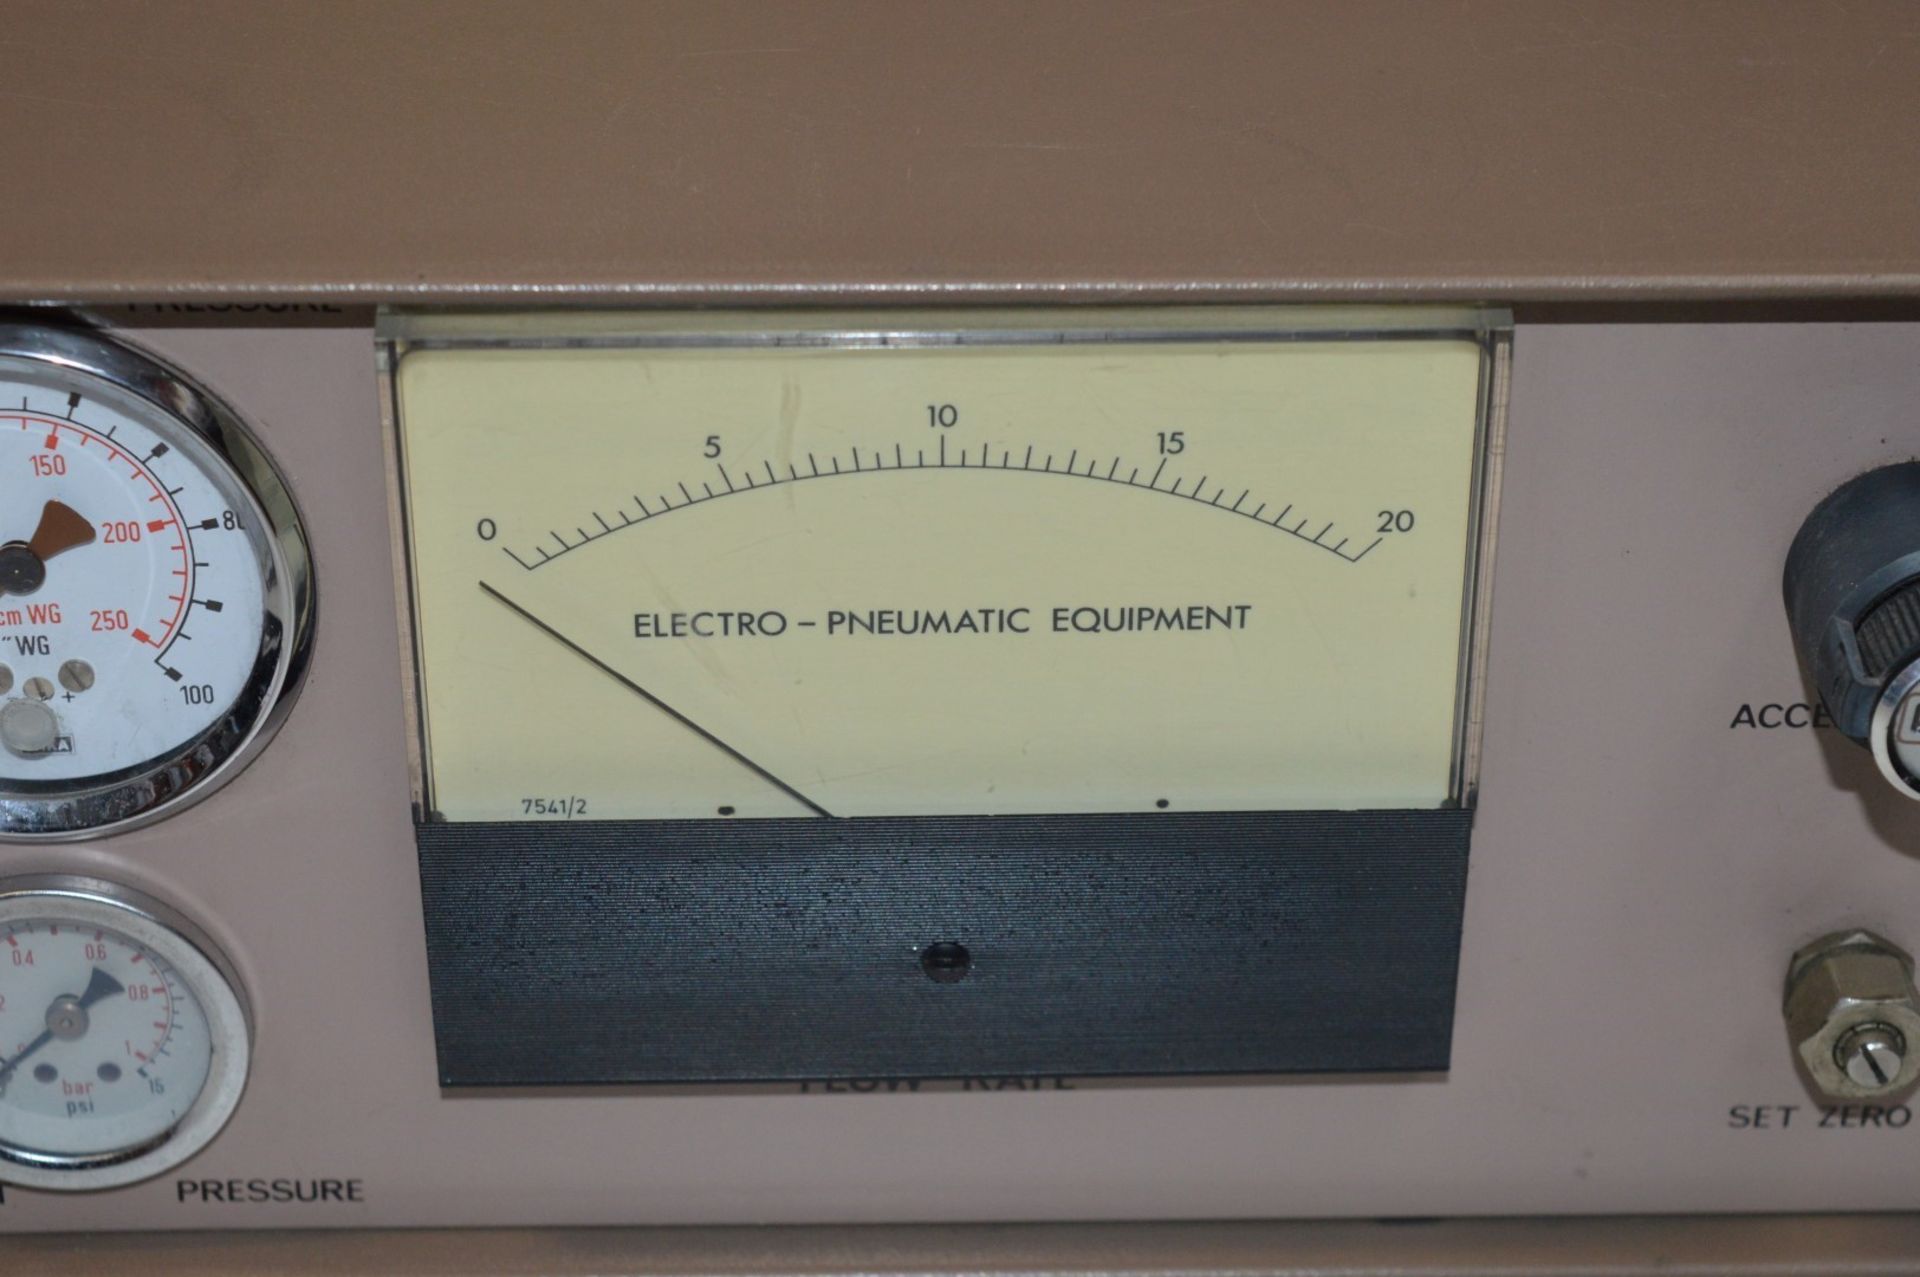 1 x Epetron 200 Mk2 Electro Pneumatic Tester - Vintage Test Equipment - CL011 - Ref J611 - Location: - Image 5 of 8